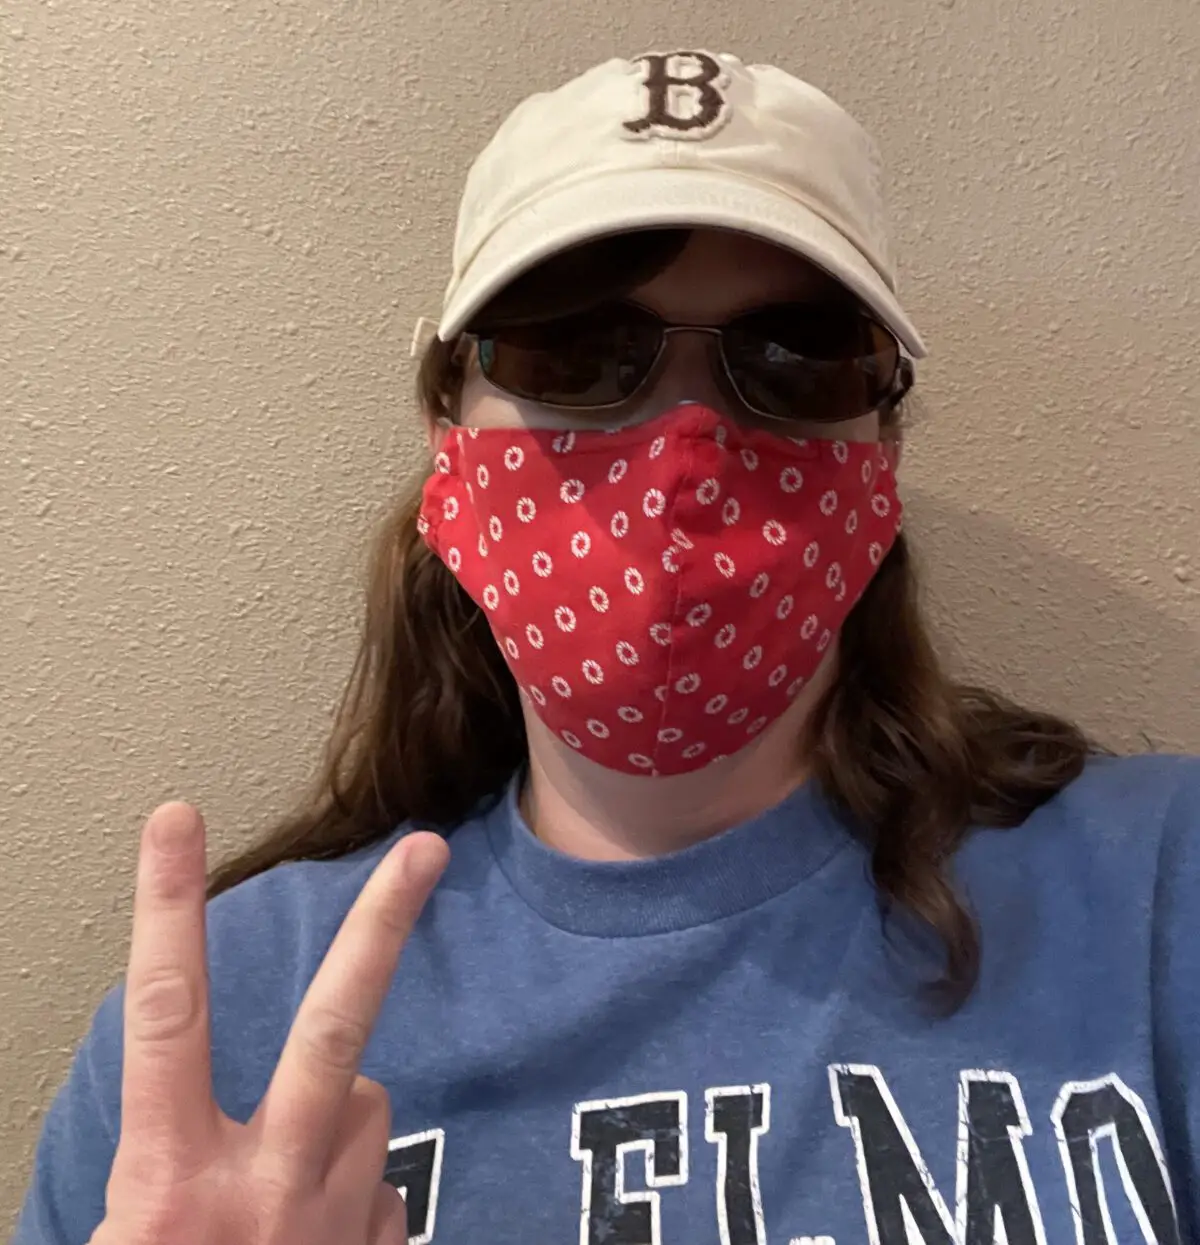 Woman with mask covering face makes a hand gesture with the number 2